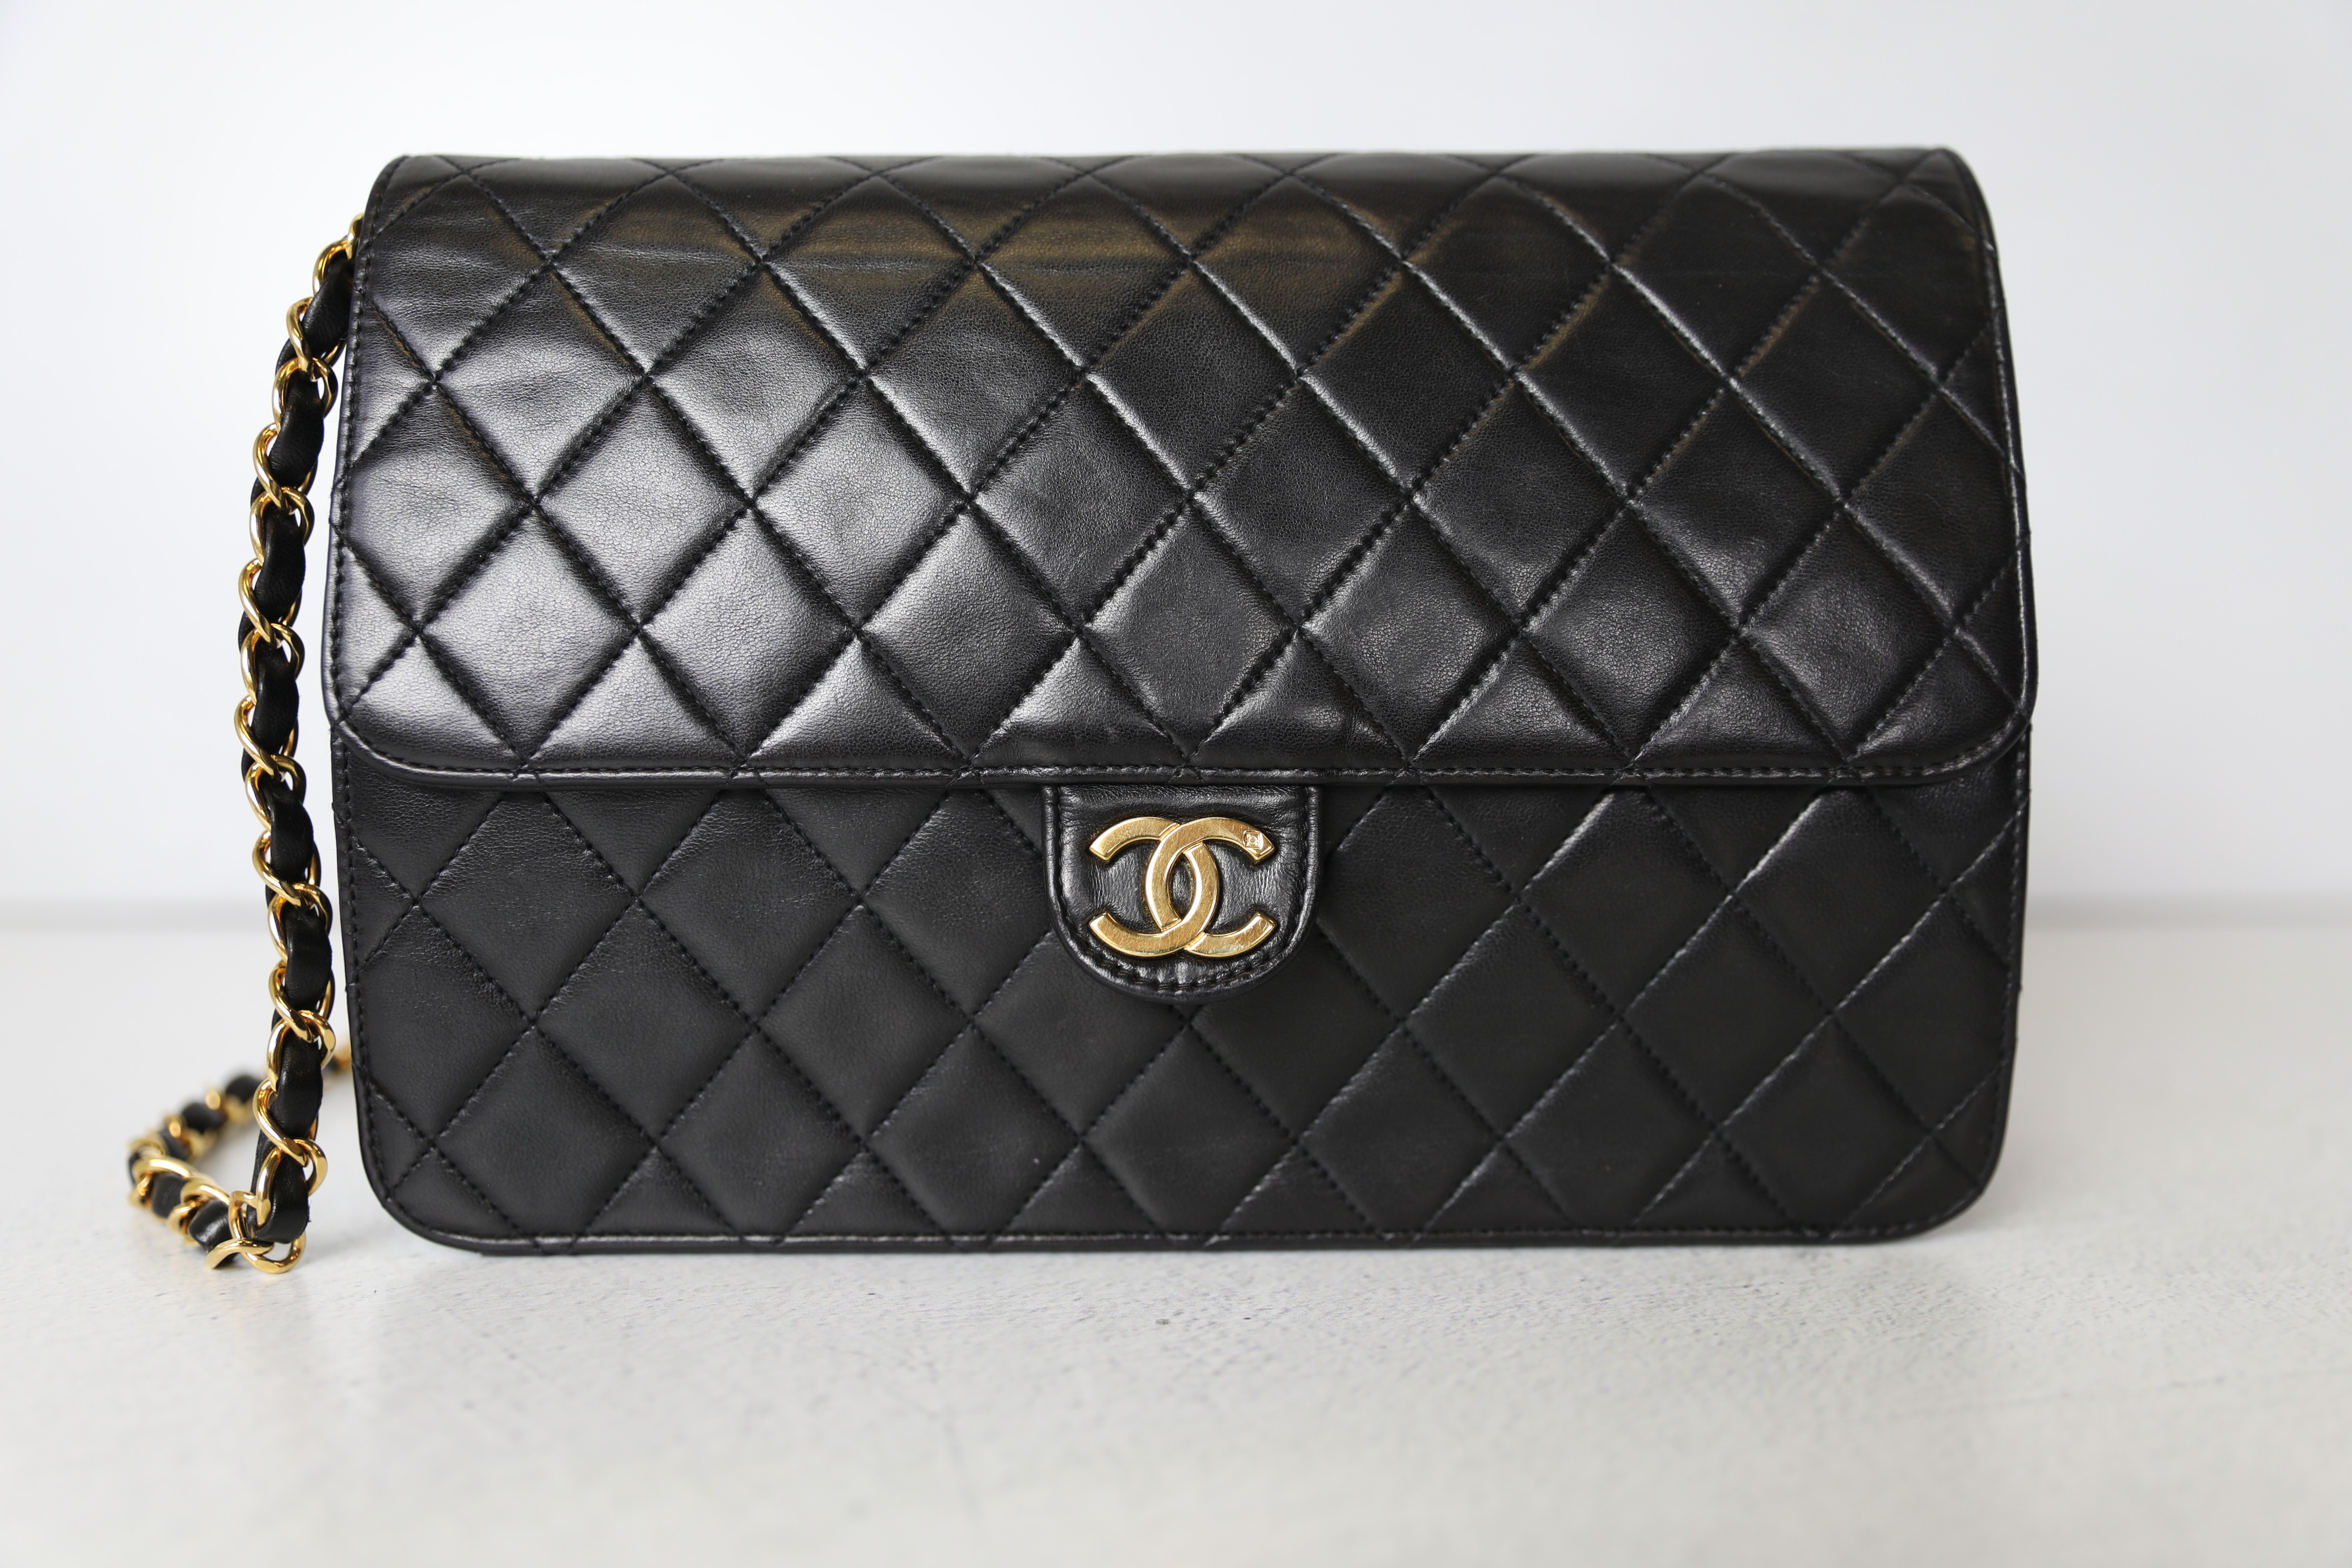 Chanel Vintage Medium Quilted Single Flap, Black Lambskin with Gold  Hardware, Preowned in Box WA001 - Julia Rose Boston